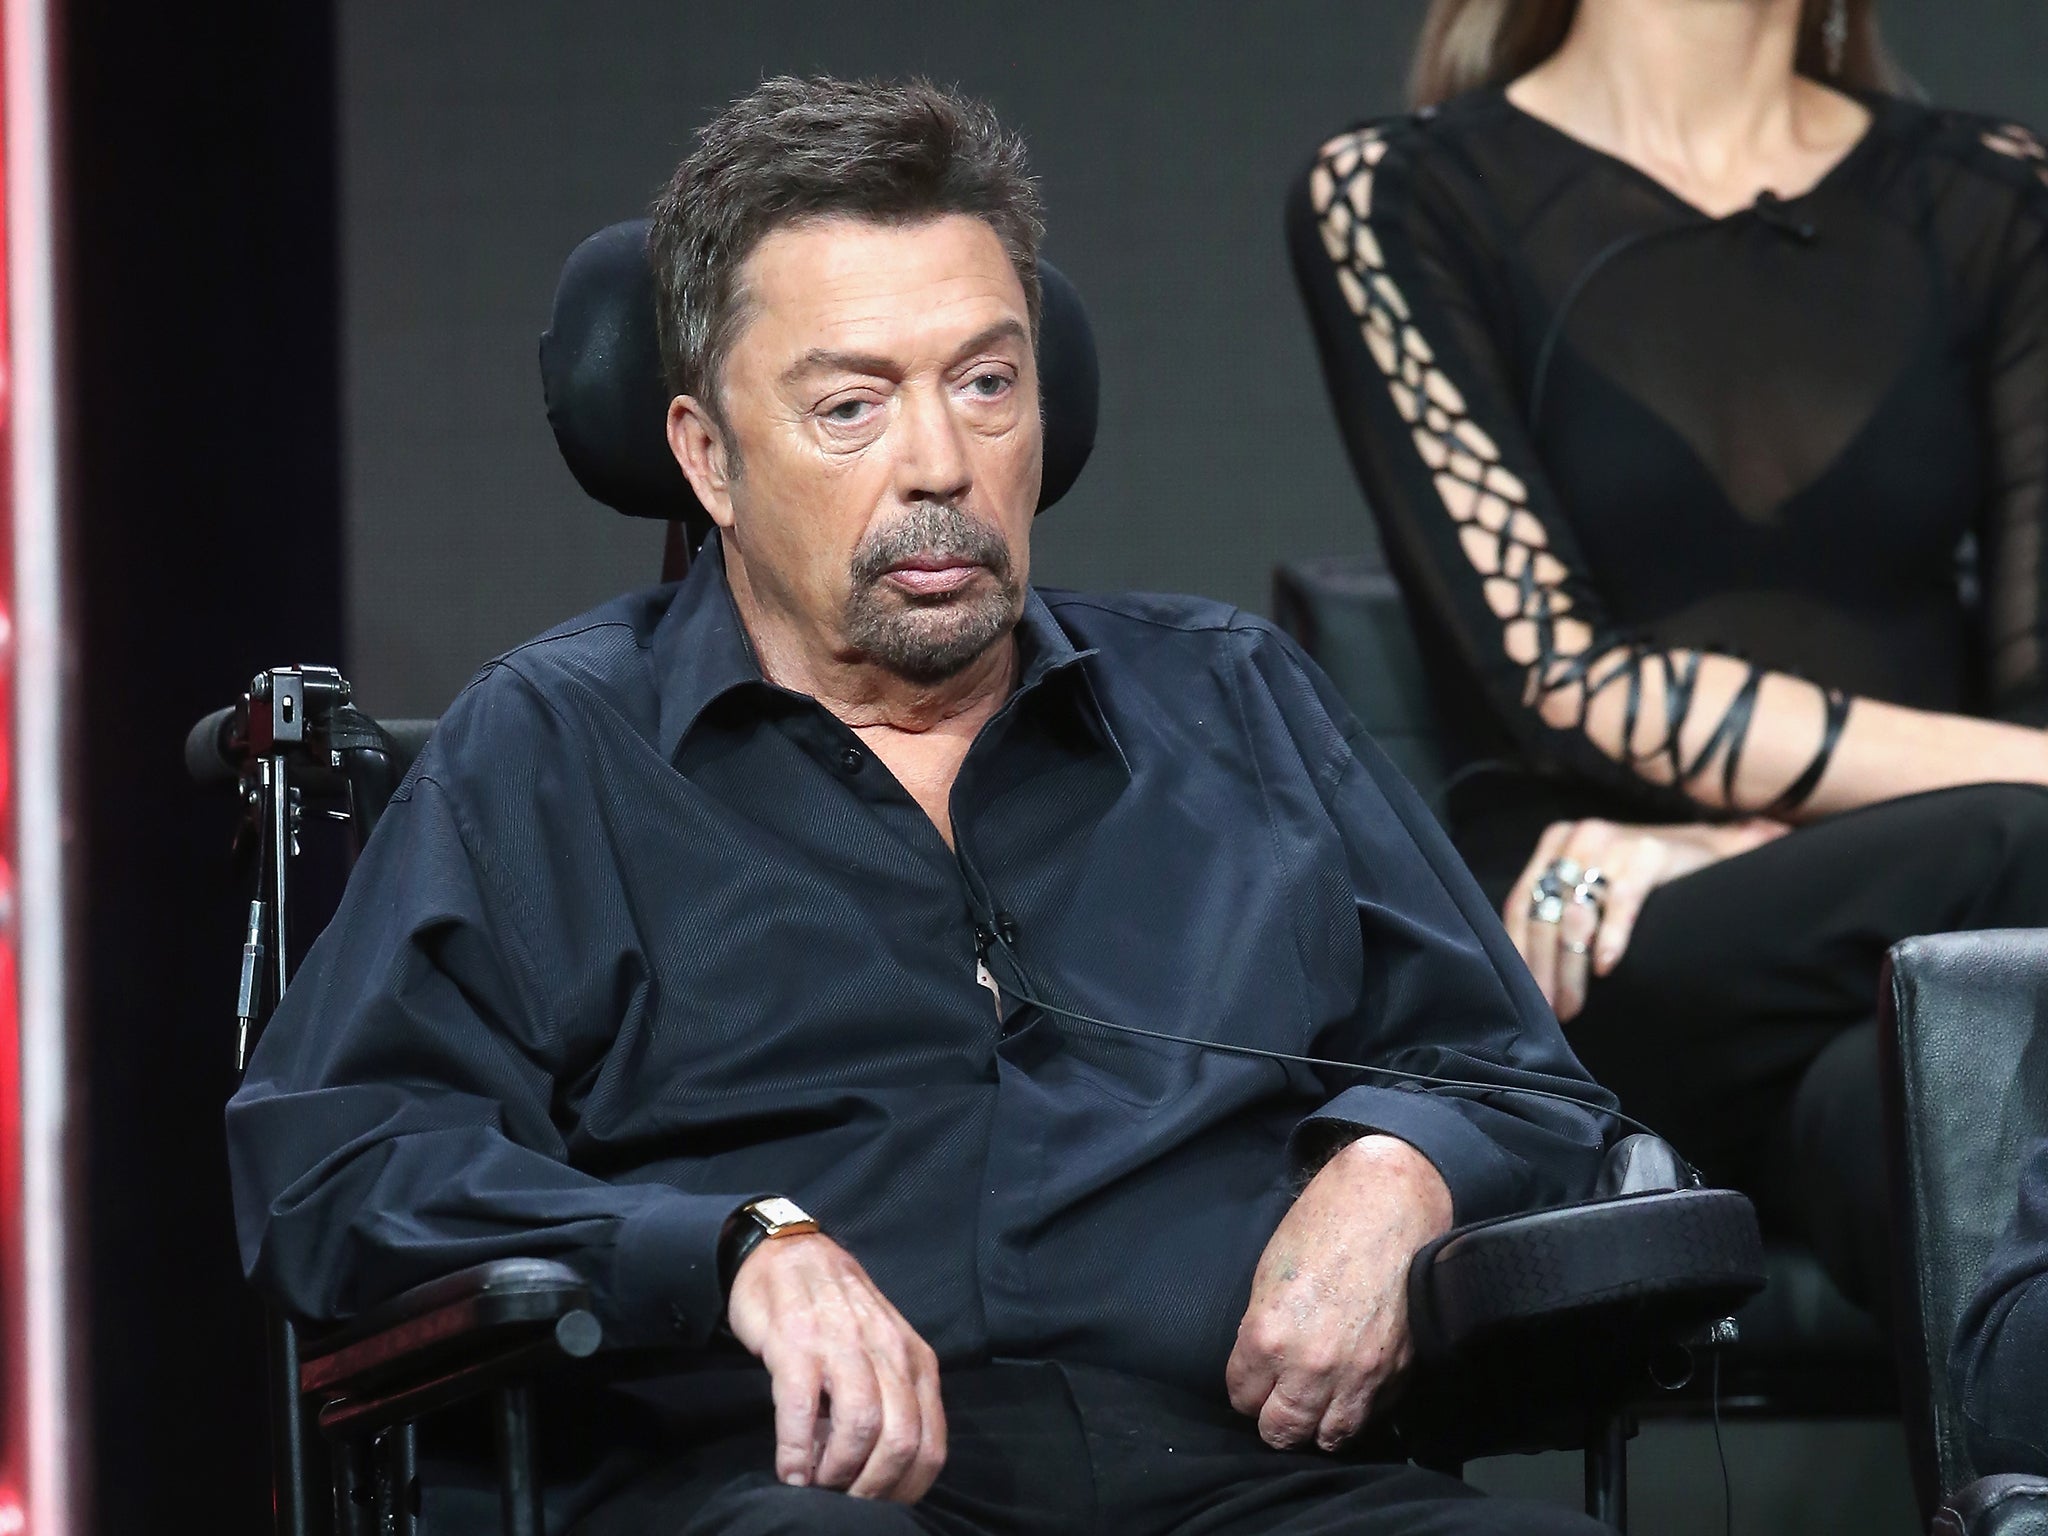 Tim Curry to make rare public appearance eight years after stroke | The